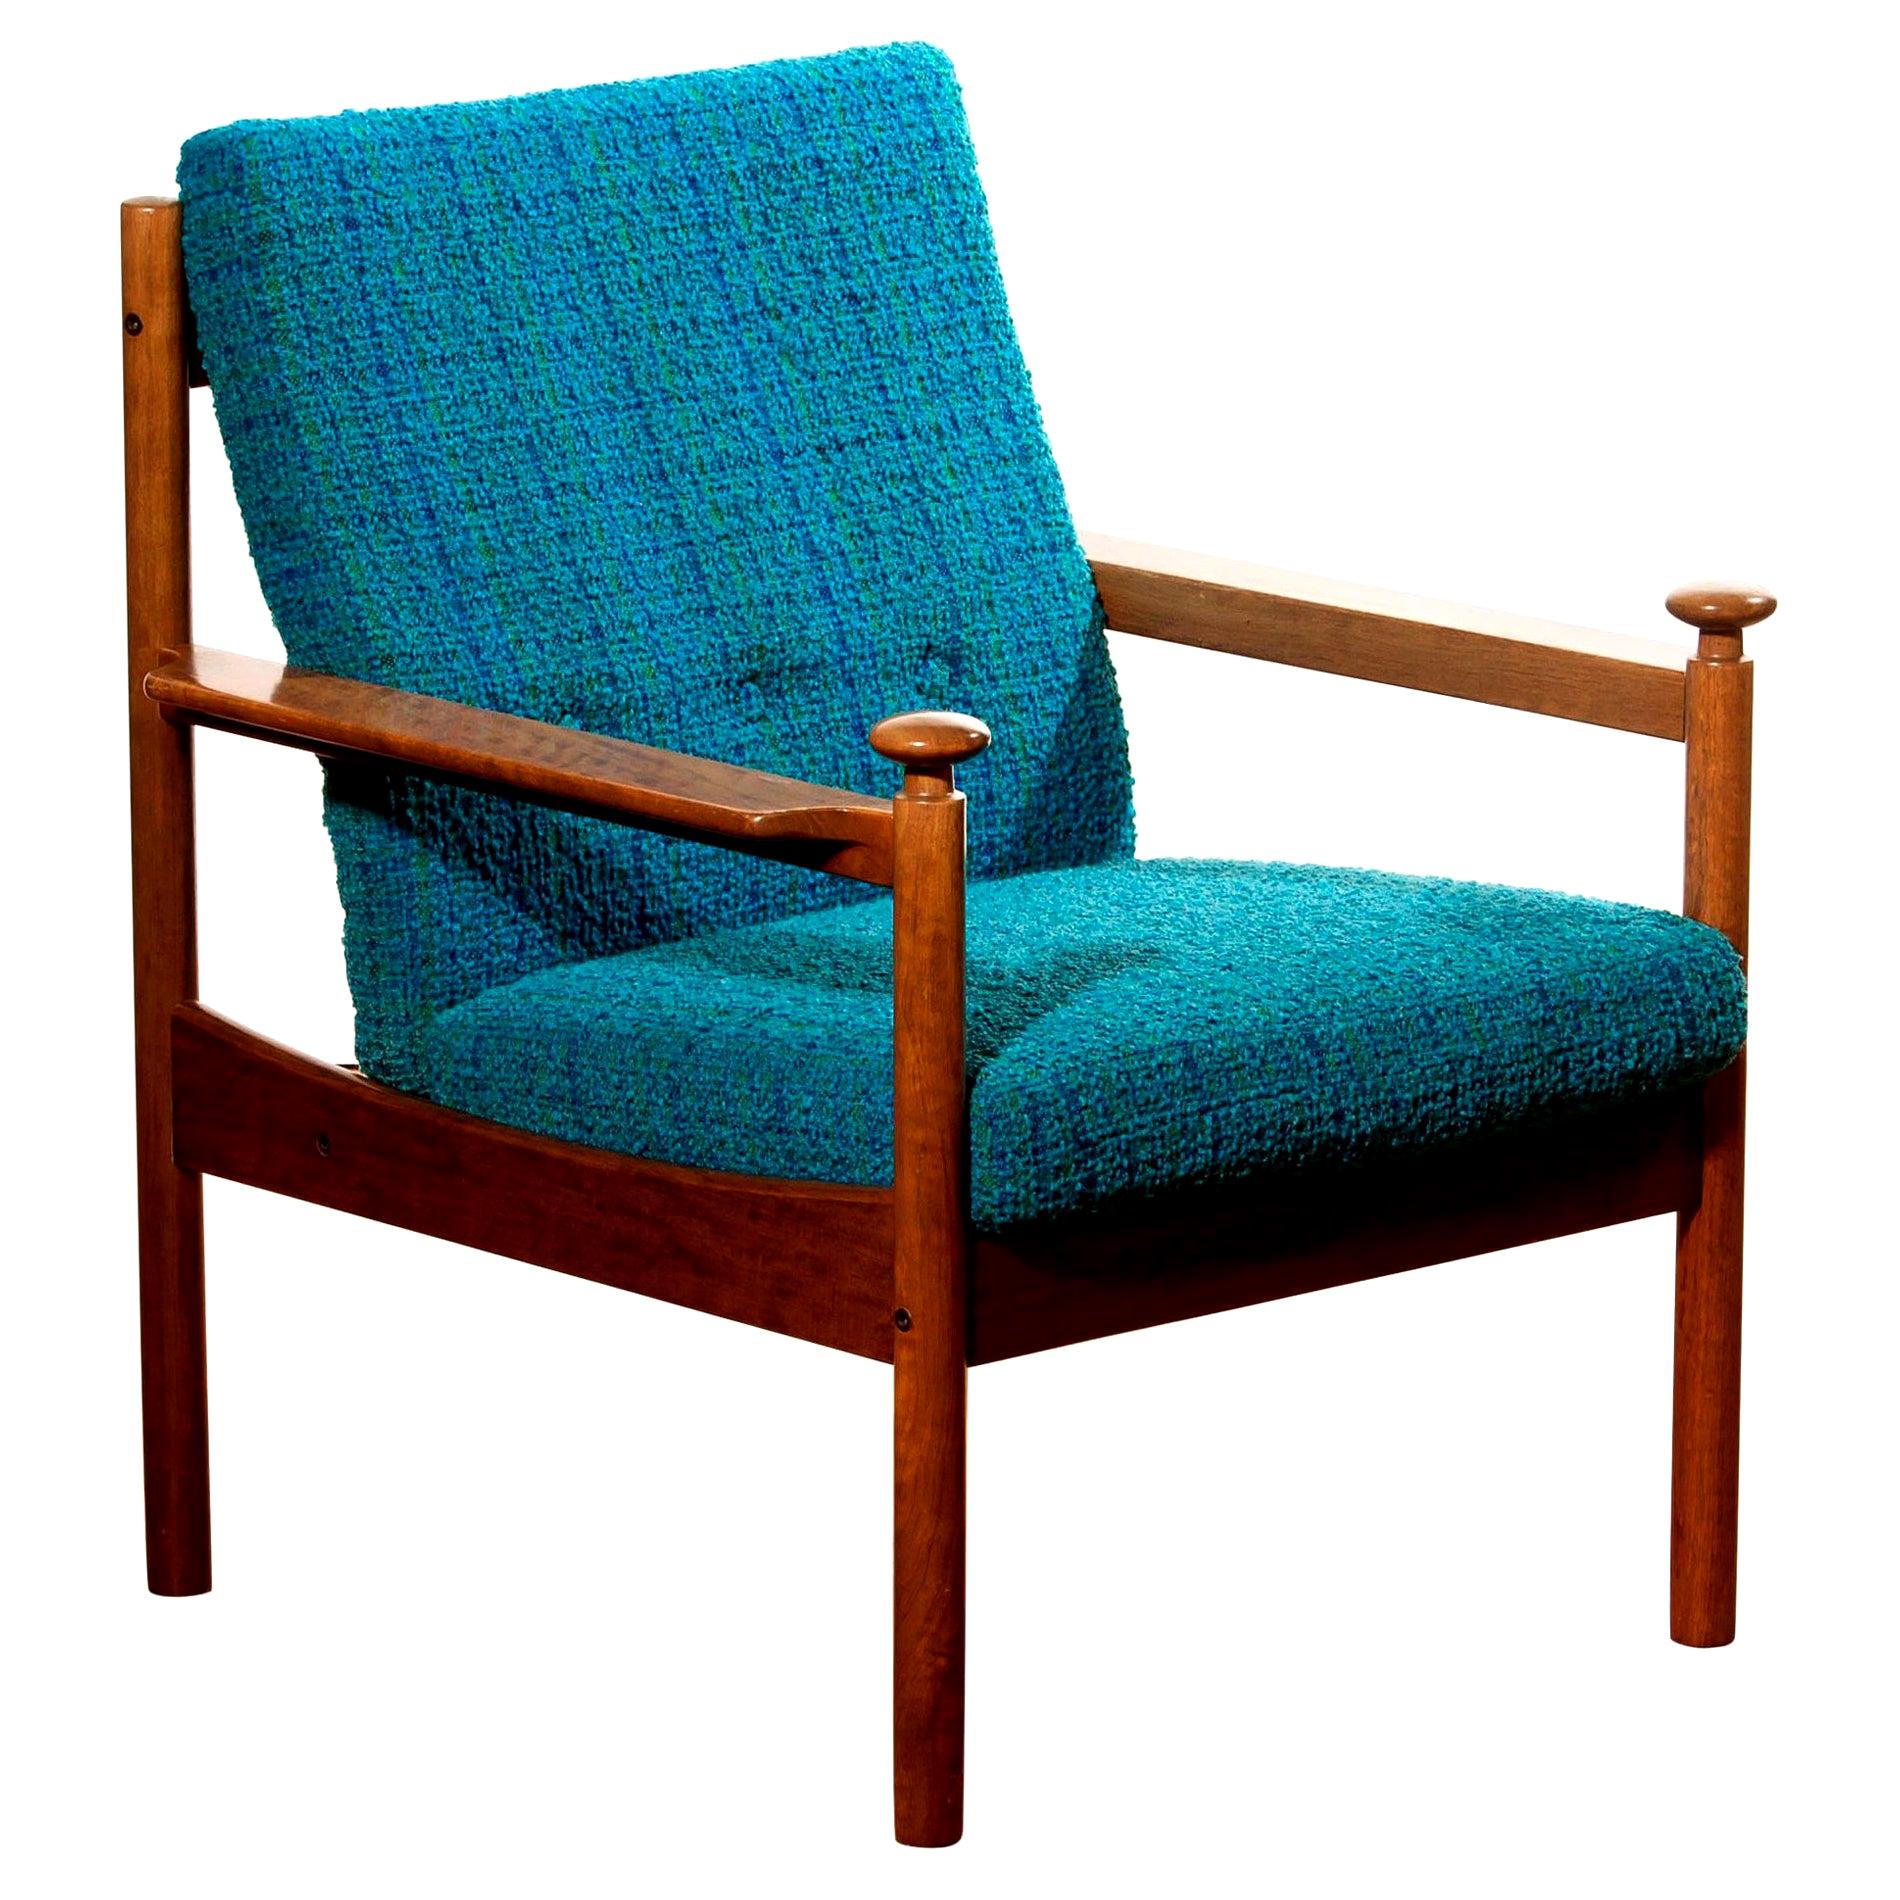 Beautiful chair designed by Torbjørn Afdal for Sandvik & Co. Mobler, Norway.
The wooden frame with the blue fabric cushions makes it a very nice combination.
It is in good condition wear consistent with age and use.
Period: 1950s.
Dimensions: H